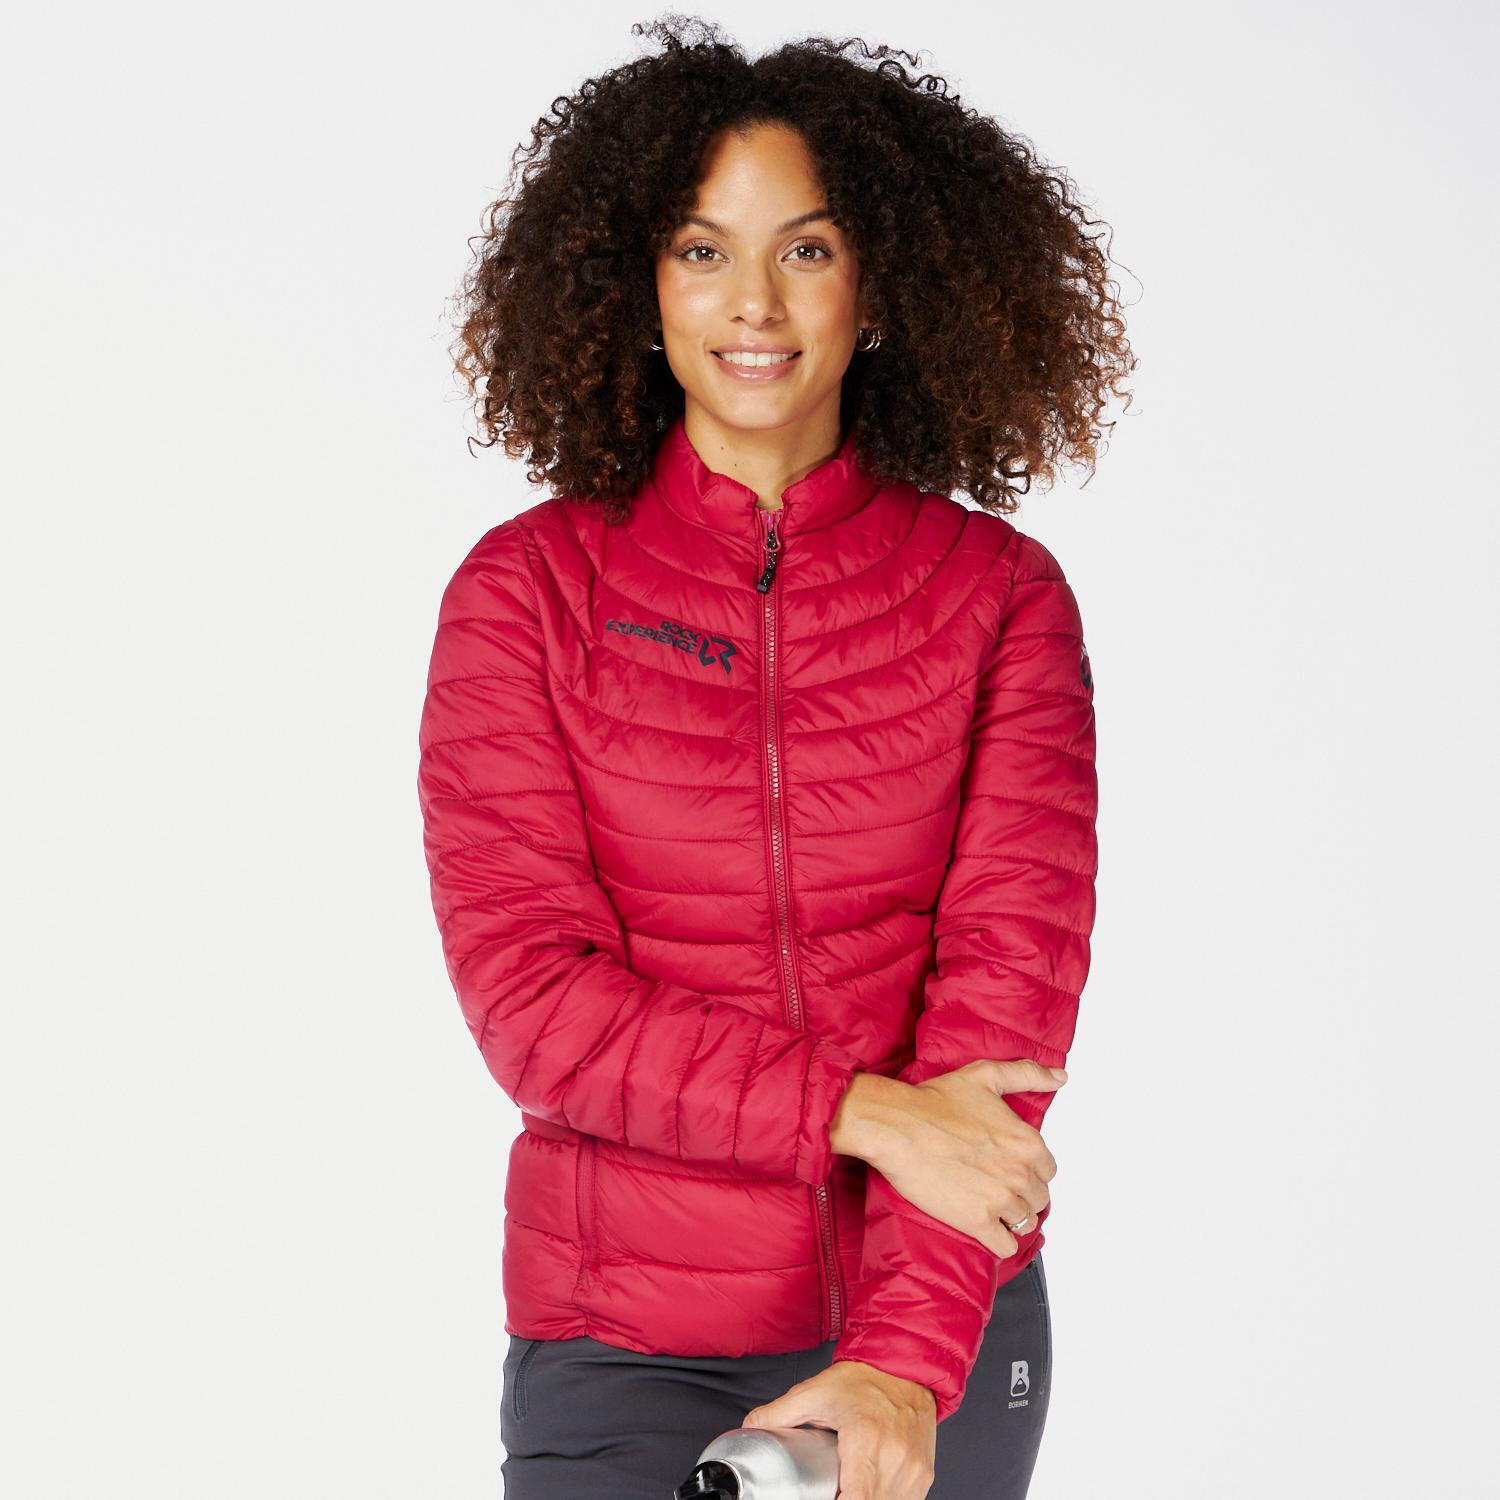 Rock Experience Fortune - Rosa - Anorak Mujer